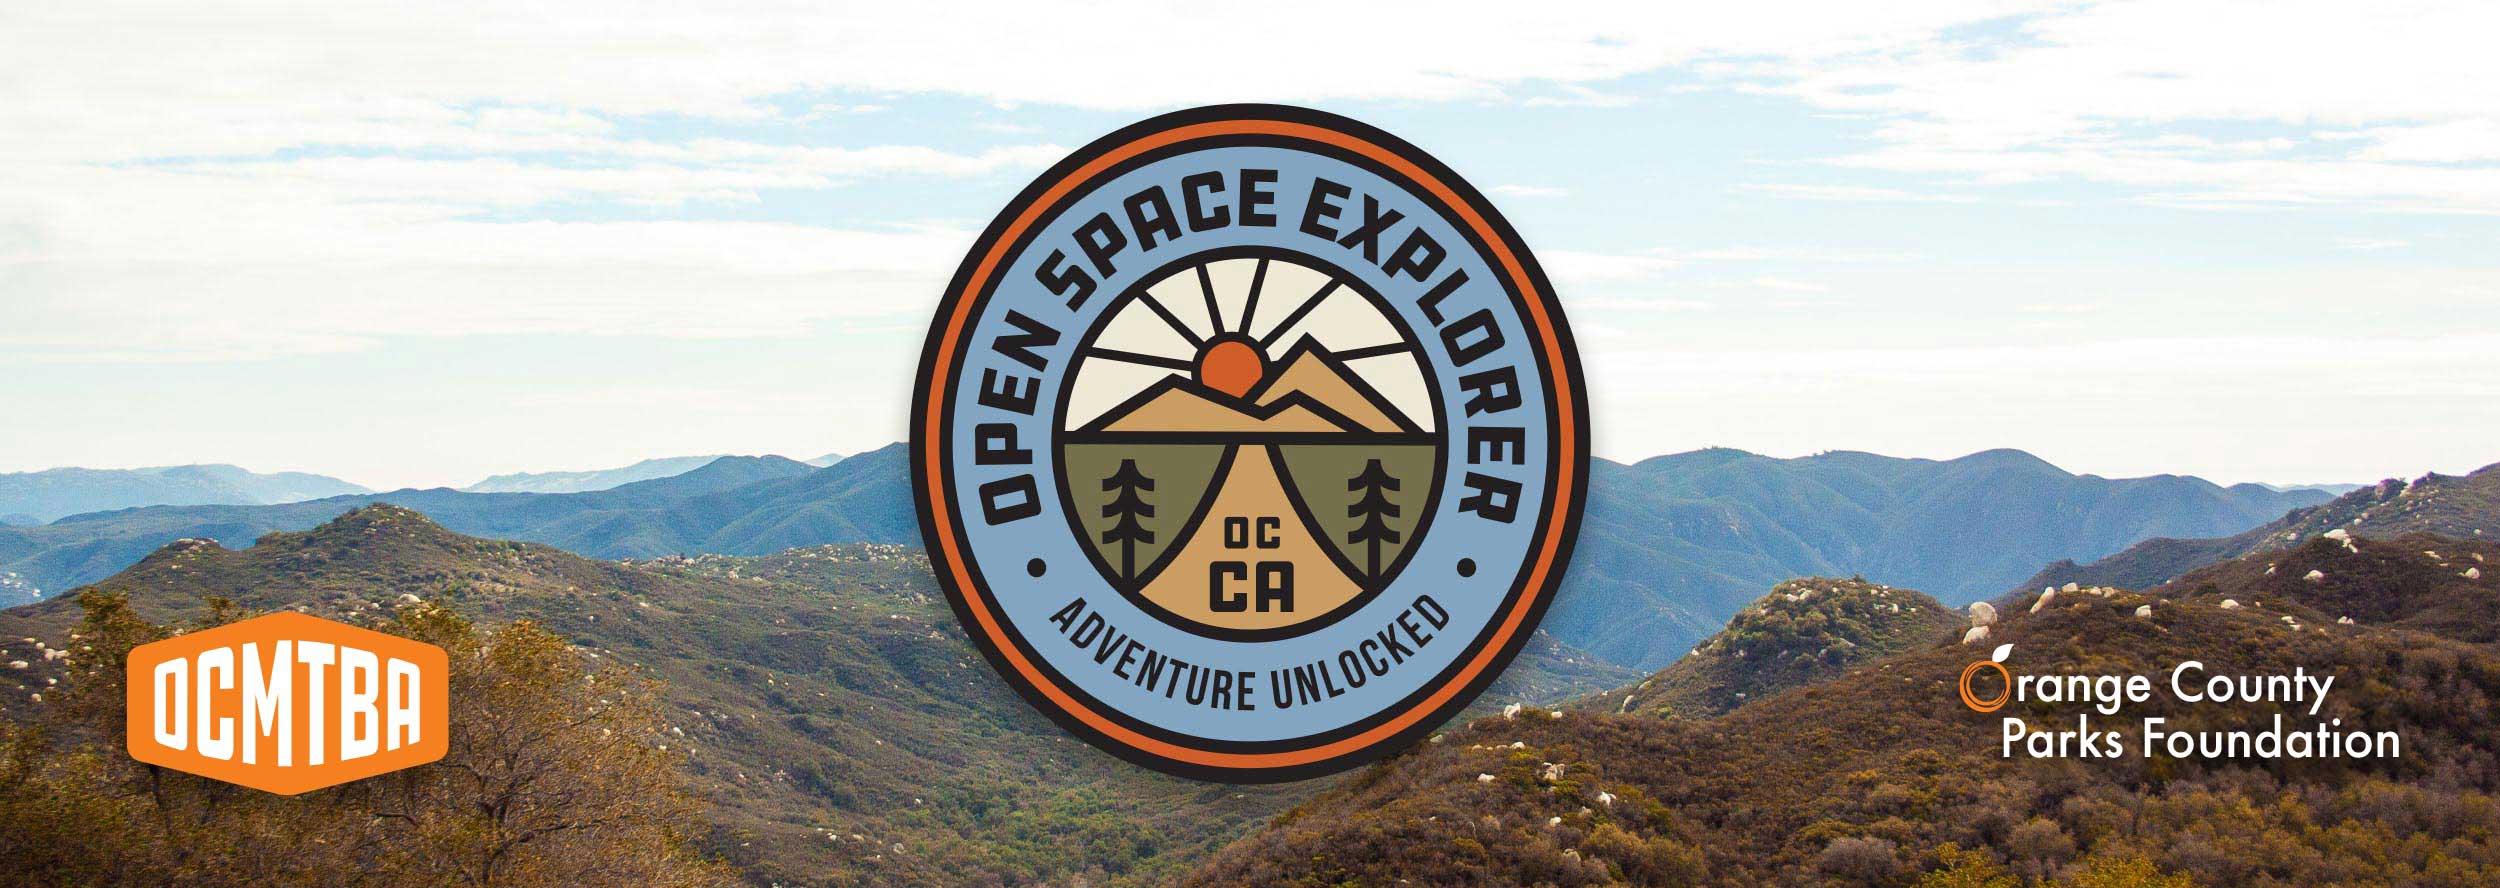 open space explorer logo above the foothills of Orange County